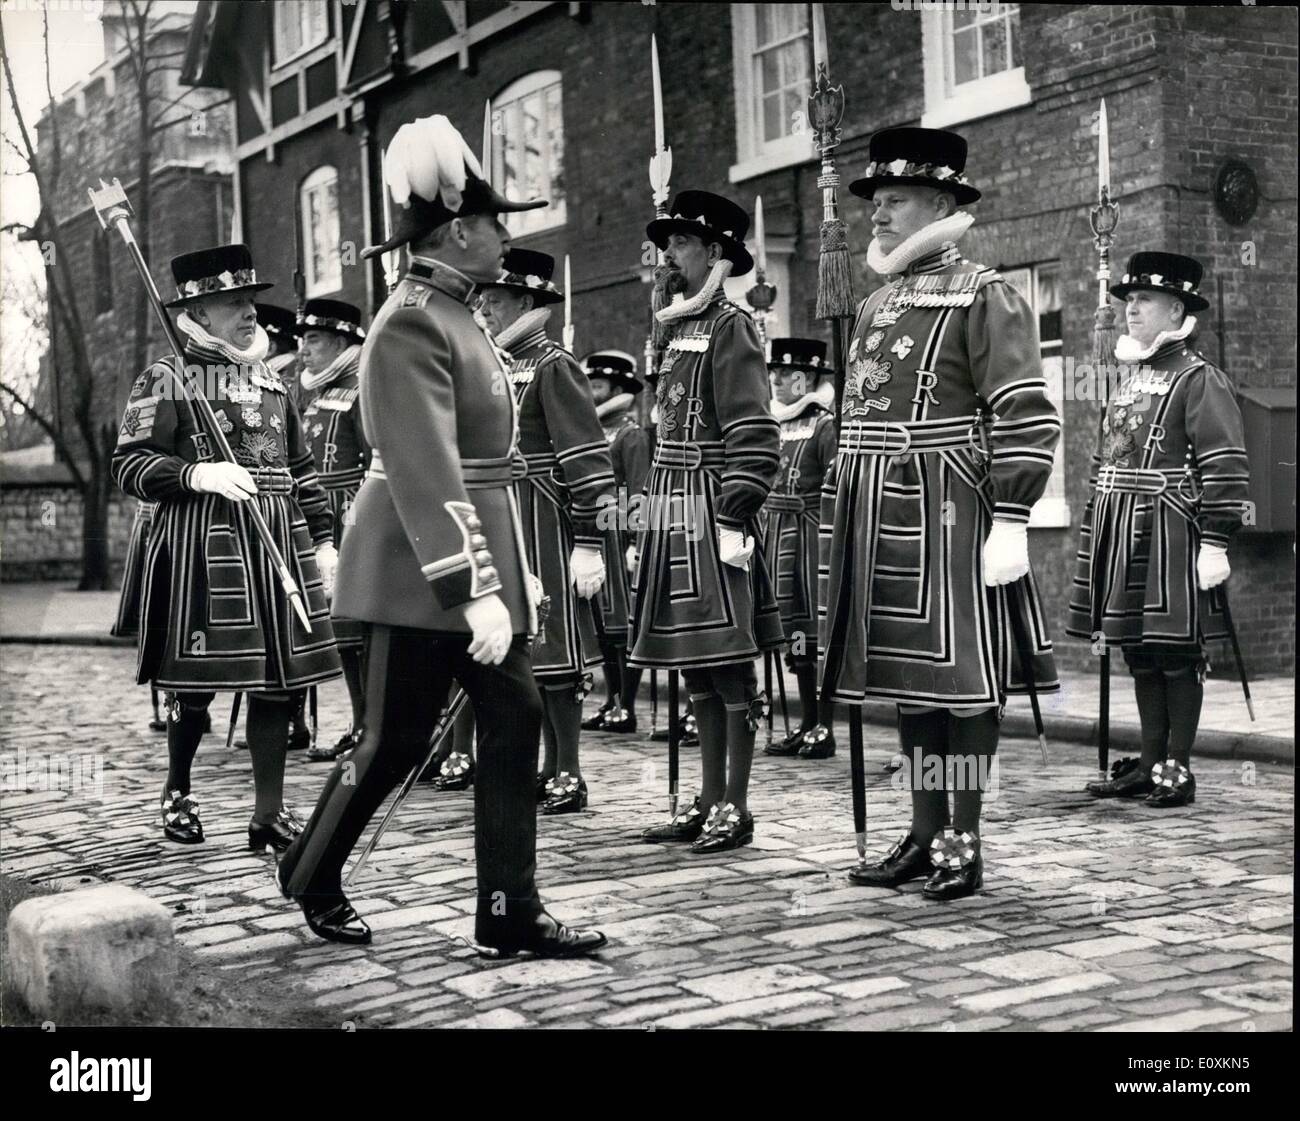 Mar. 03, 1967 - Easter Day Parade At The Tower: The Easter Day Parade took place today at the Tower of London when Yeomen Warders were inspected by the Resident Governor, Col. Sir Thomas Butler, prior to marching to the Chapel Royal of St. Peter Ad Vinula for the services. Photo Shows: col Sir Thomas Butler, the Resident Governor, inspecting the Yeomen Warders at the Tower today. Stock Photo